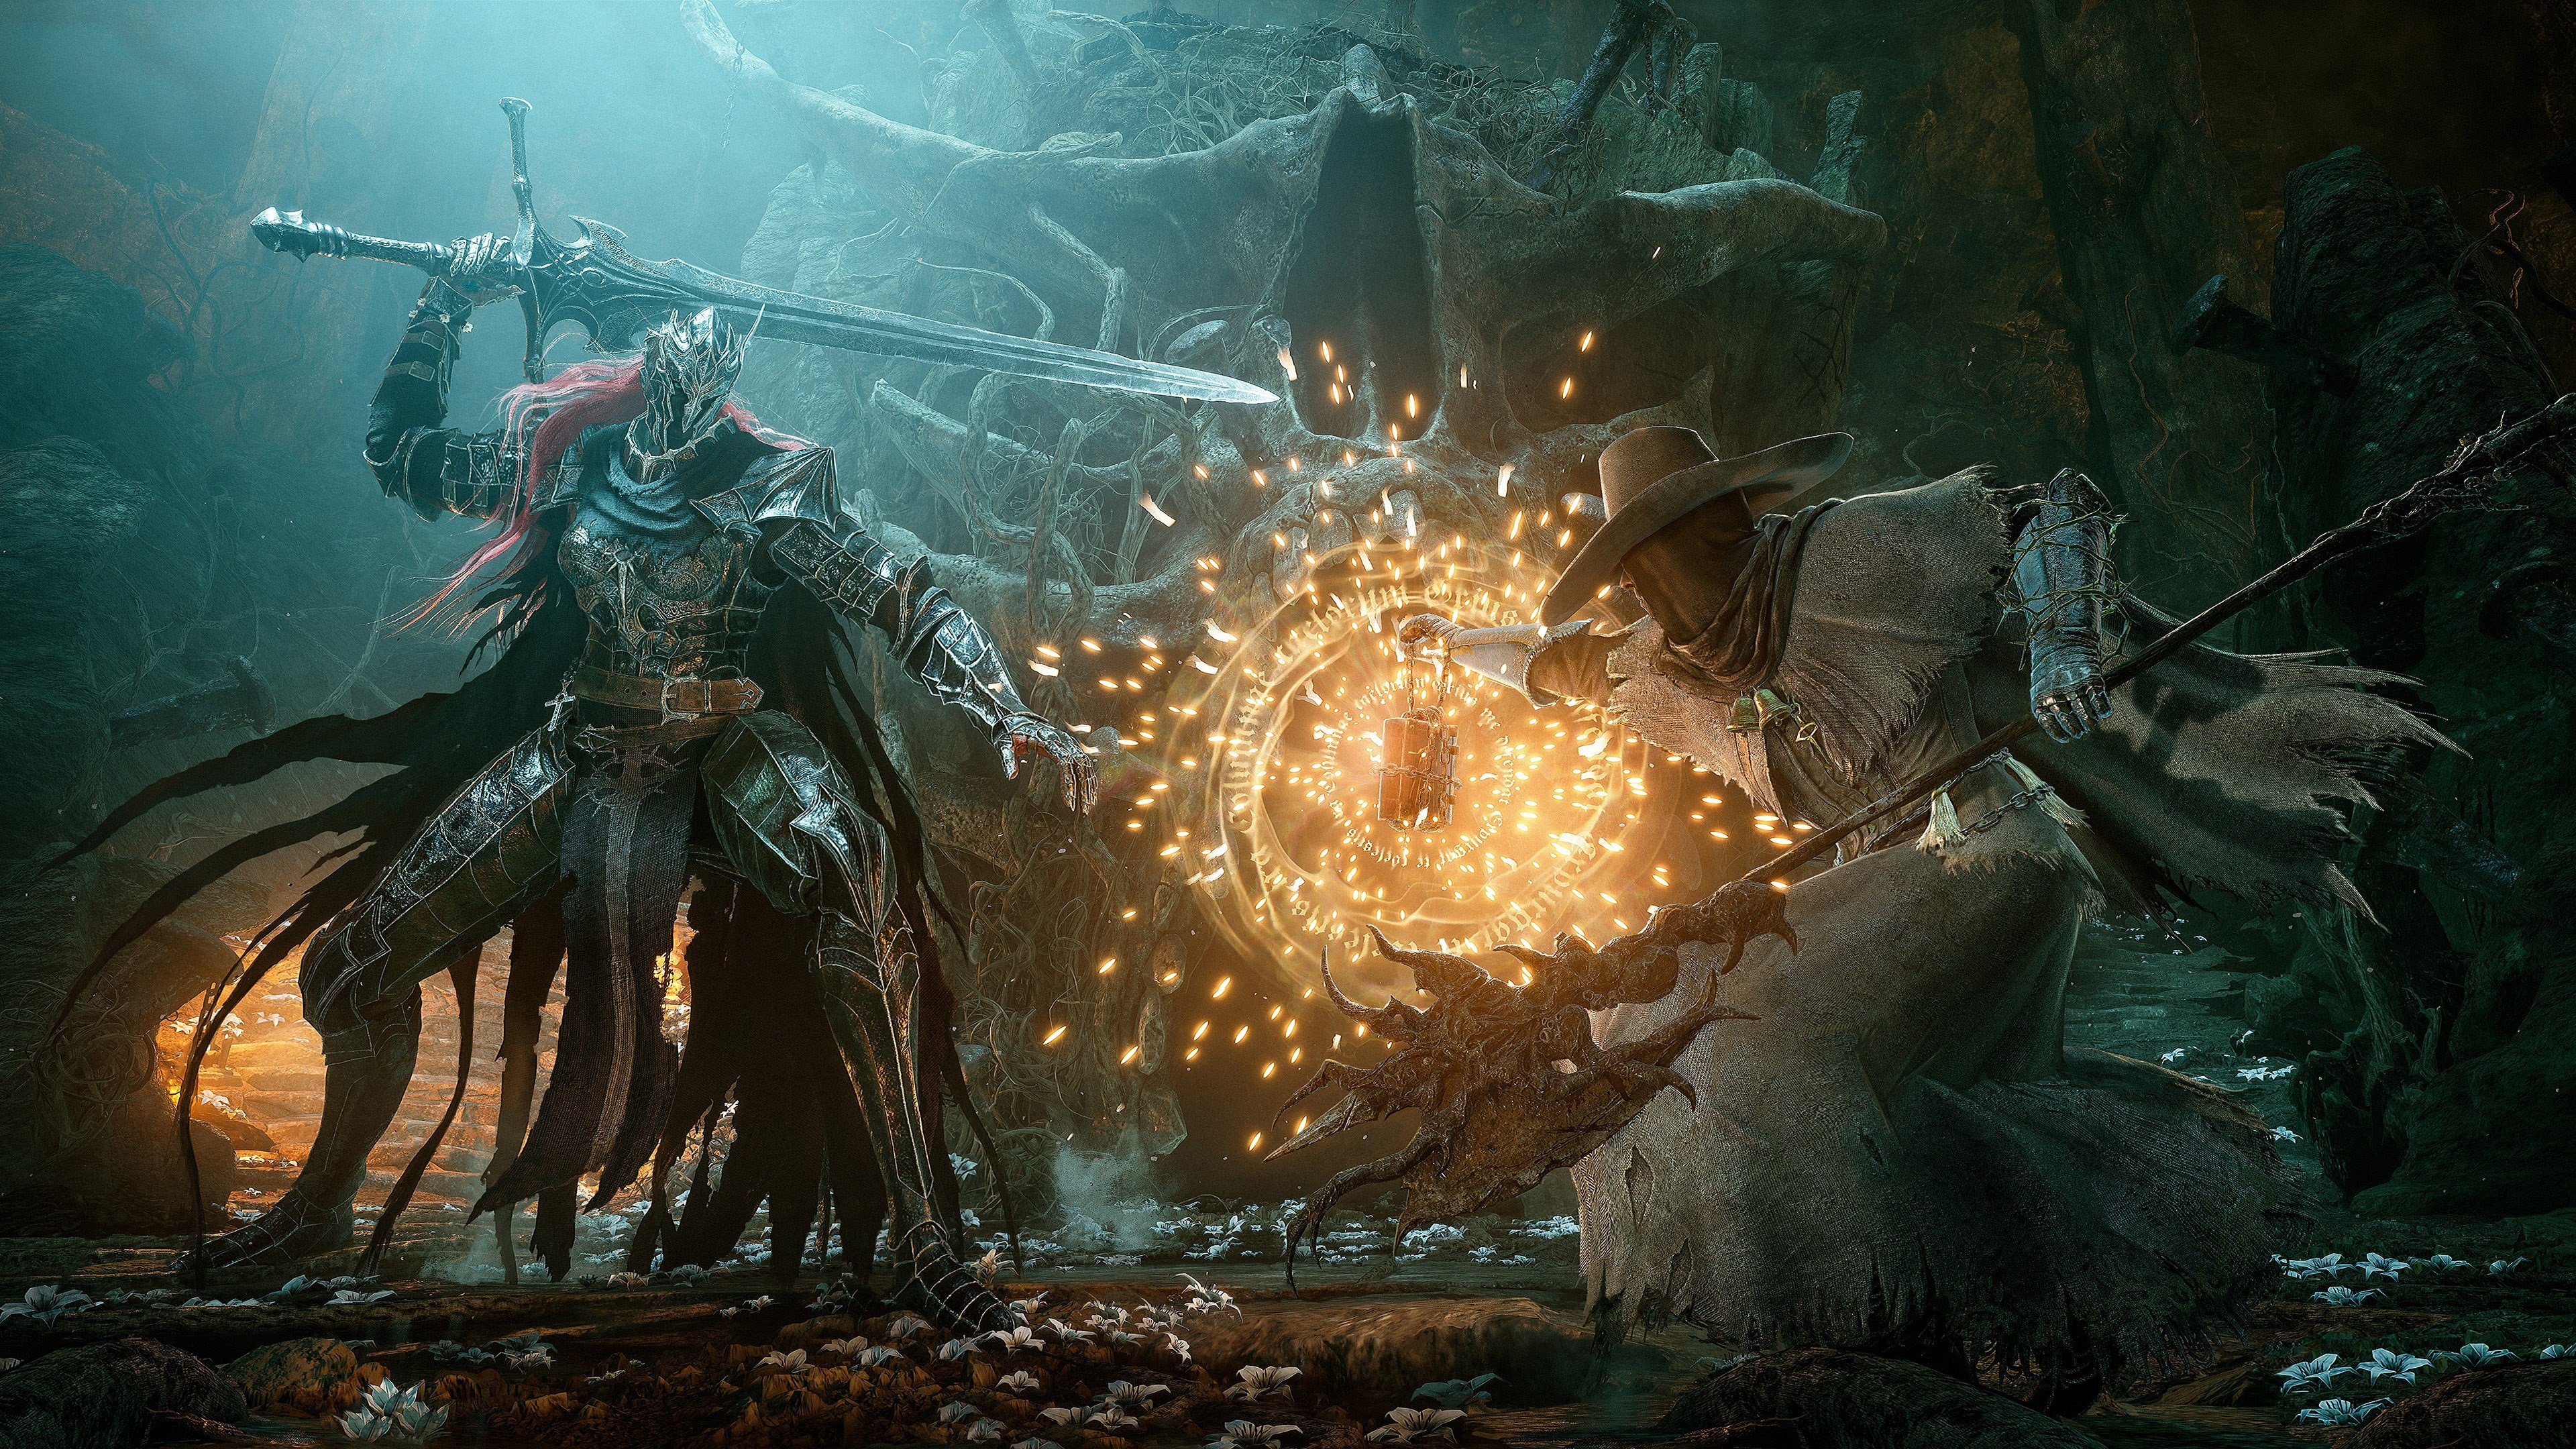 Lords of the Fallen launches October 13 - Gematsu